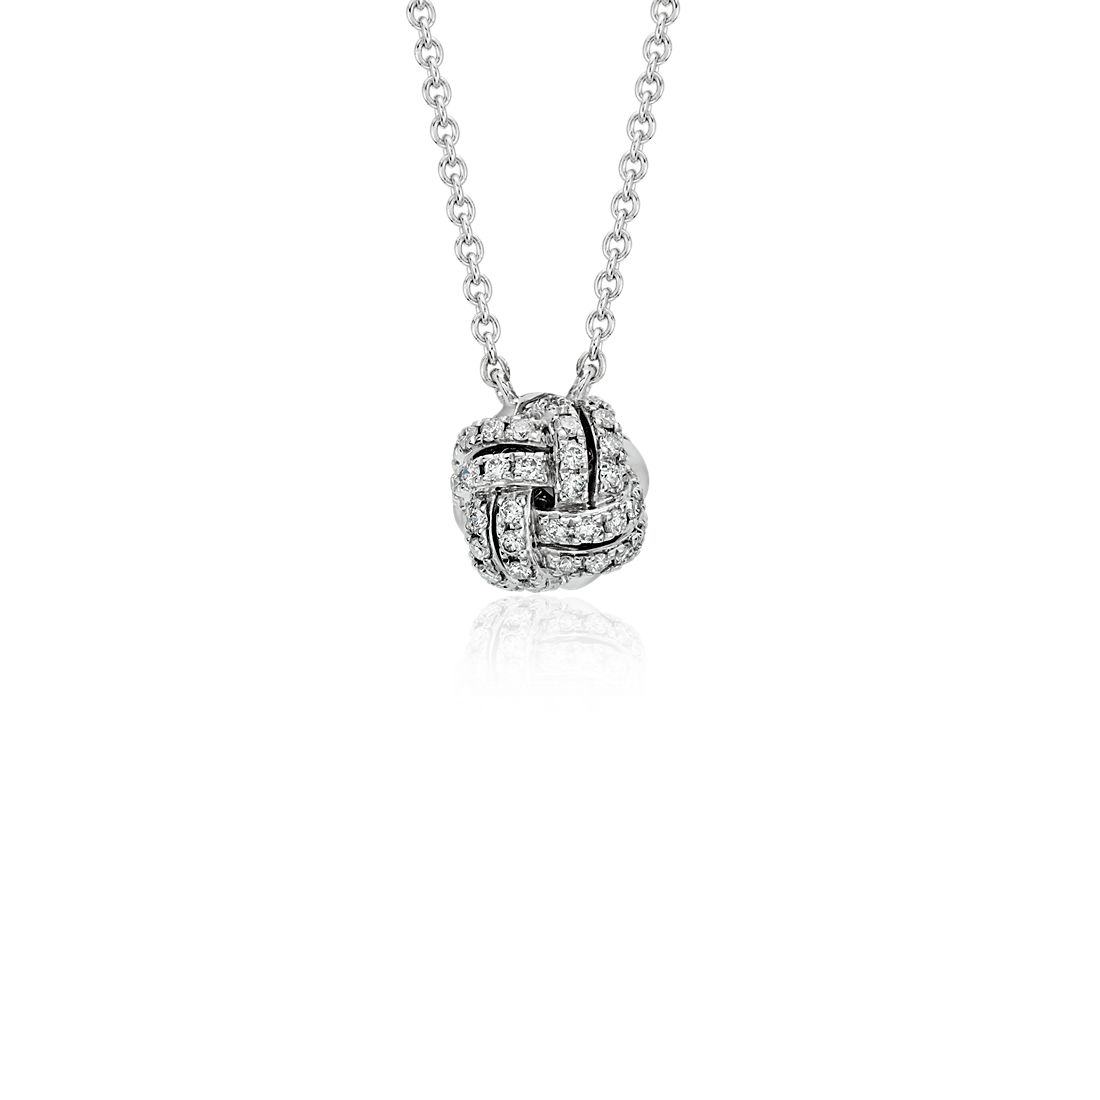 9ct White Gold Diamond Love Knot Pendant Necklace on Chain 